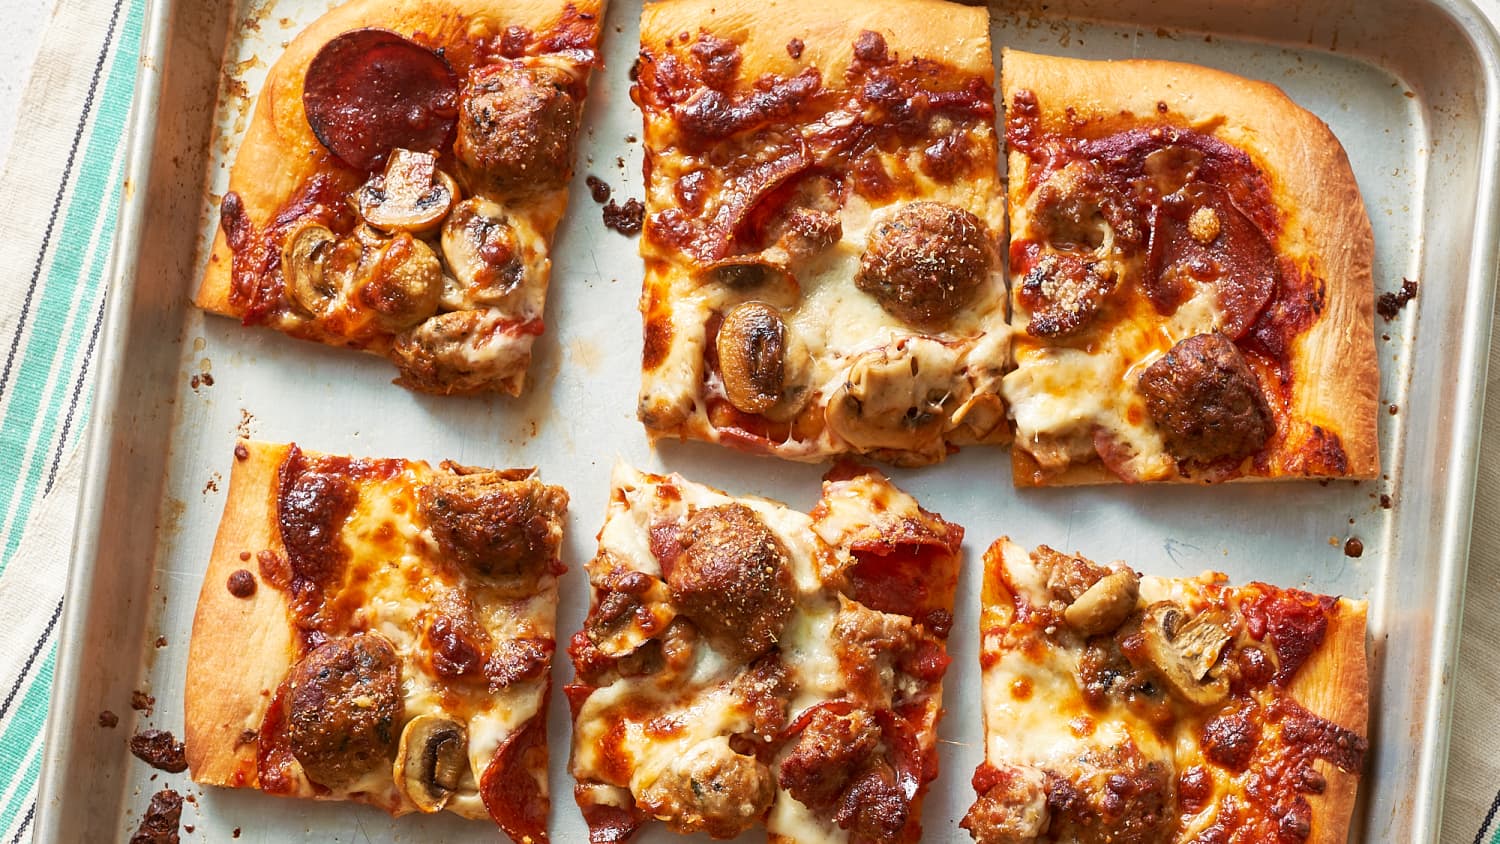 Sheet Pan Pizza Recipe (With Pepperoni and Mushrooms)